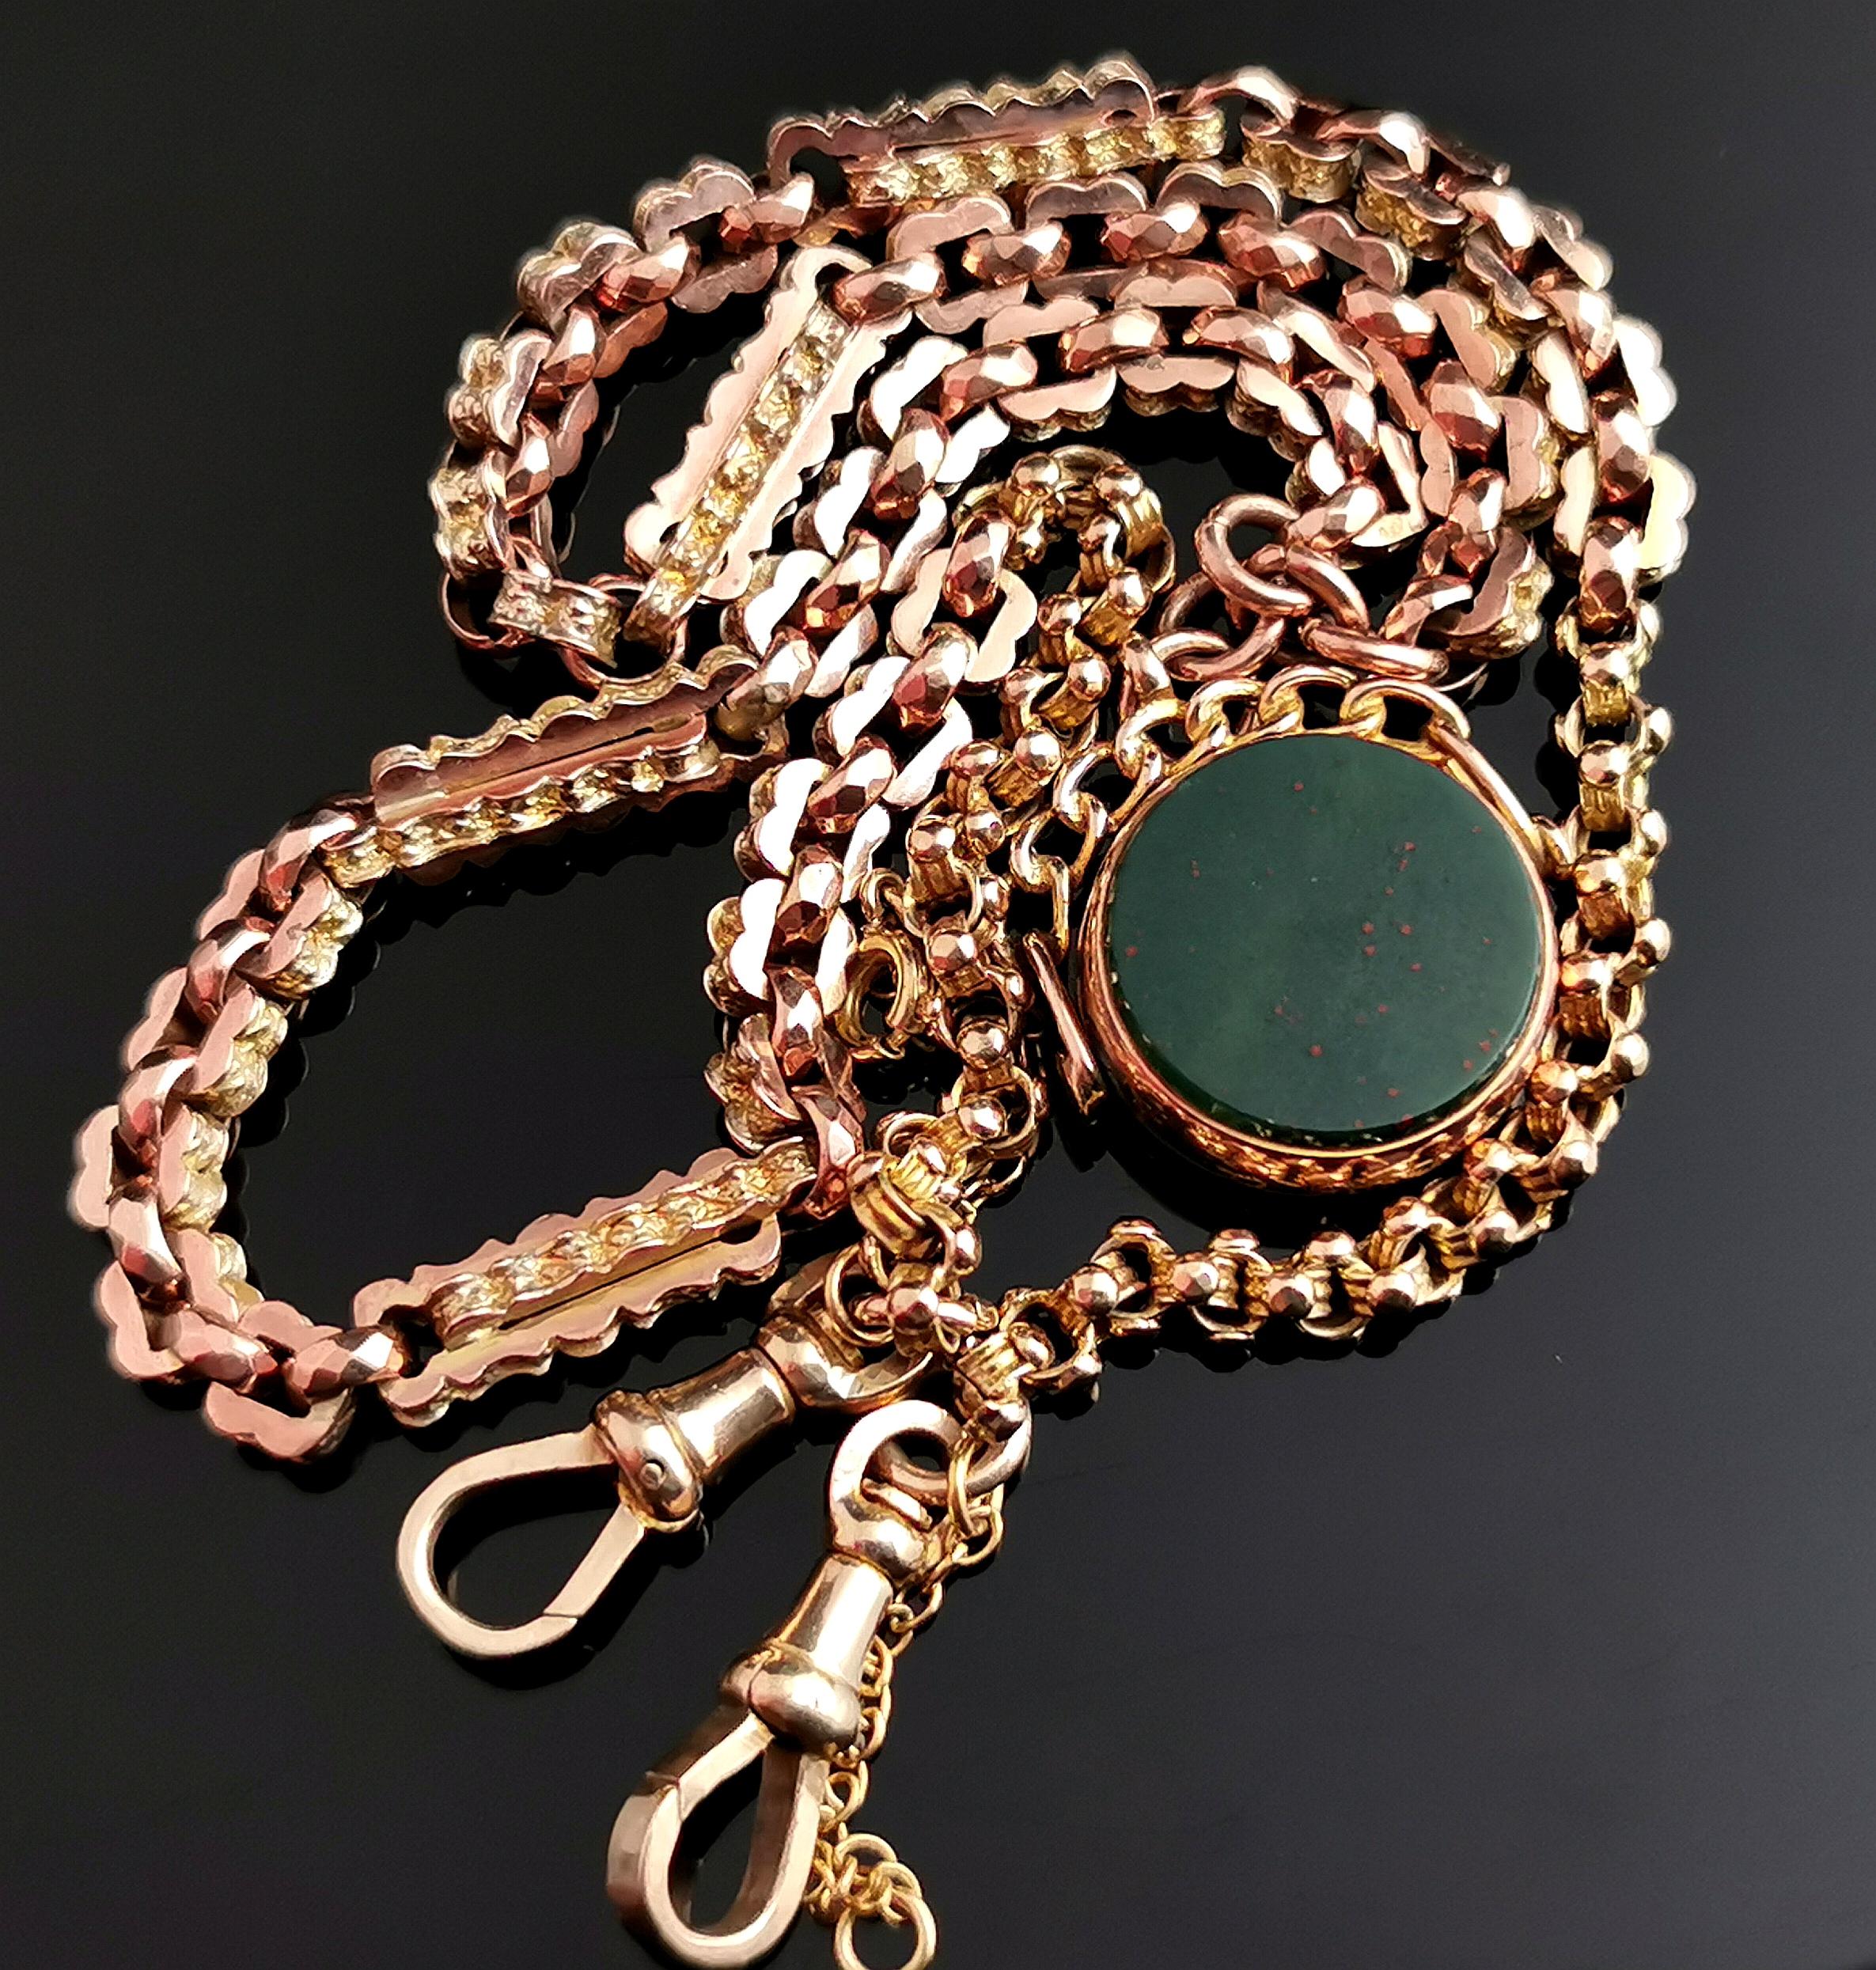 Women's or Men's Antique 9k Gold Fancy Link Albert Chain, Watch Chain Necklace, Spinning Fob